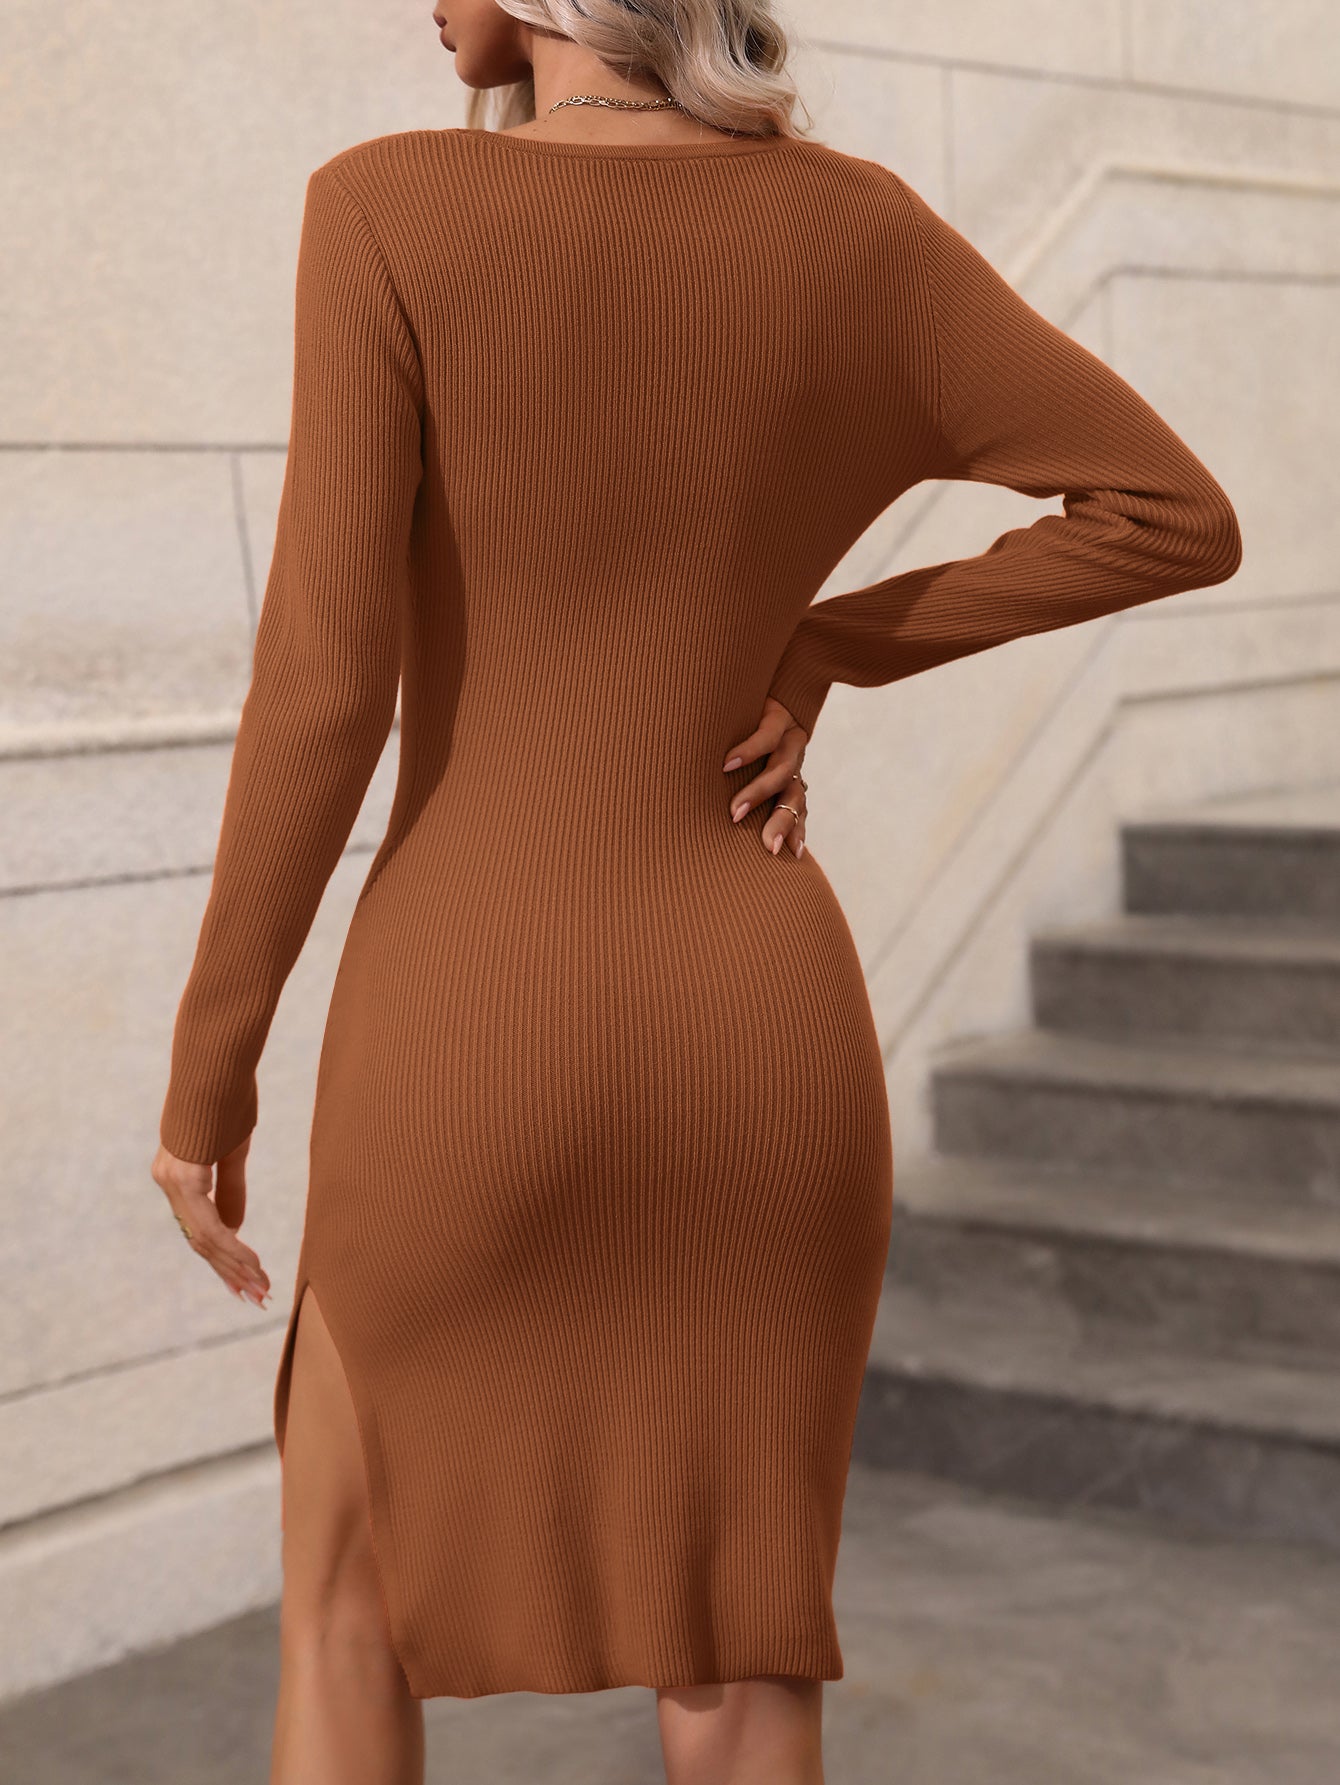 Contrast Slit Sweater Dress  | KIKI COUTURE-Women's Clothing, Designer Fashions, Shoes, Bags